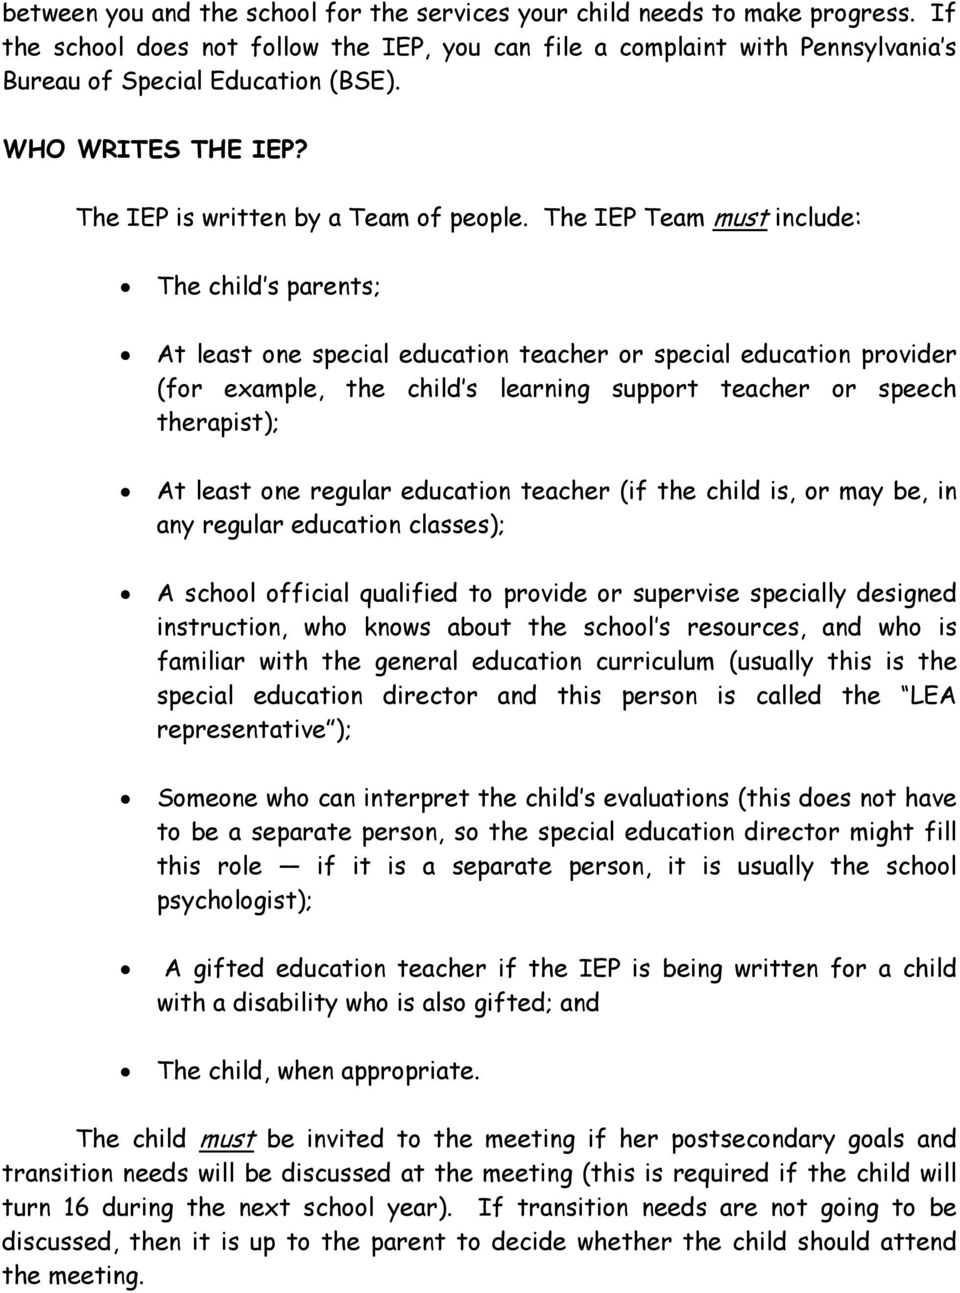 The IEP Team must include: The child s parents; At least one special education teacher or special education provider (for example, the child s learning support teacher or speech therapist); At least